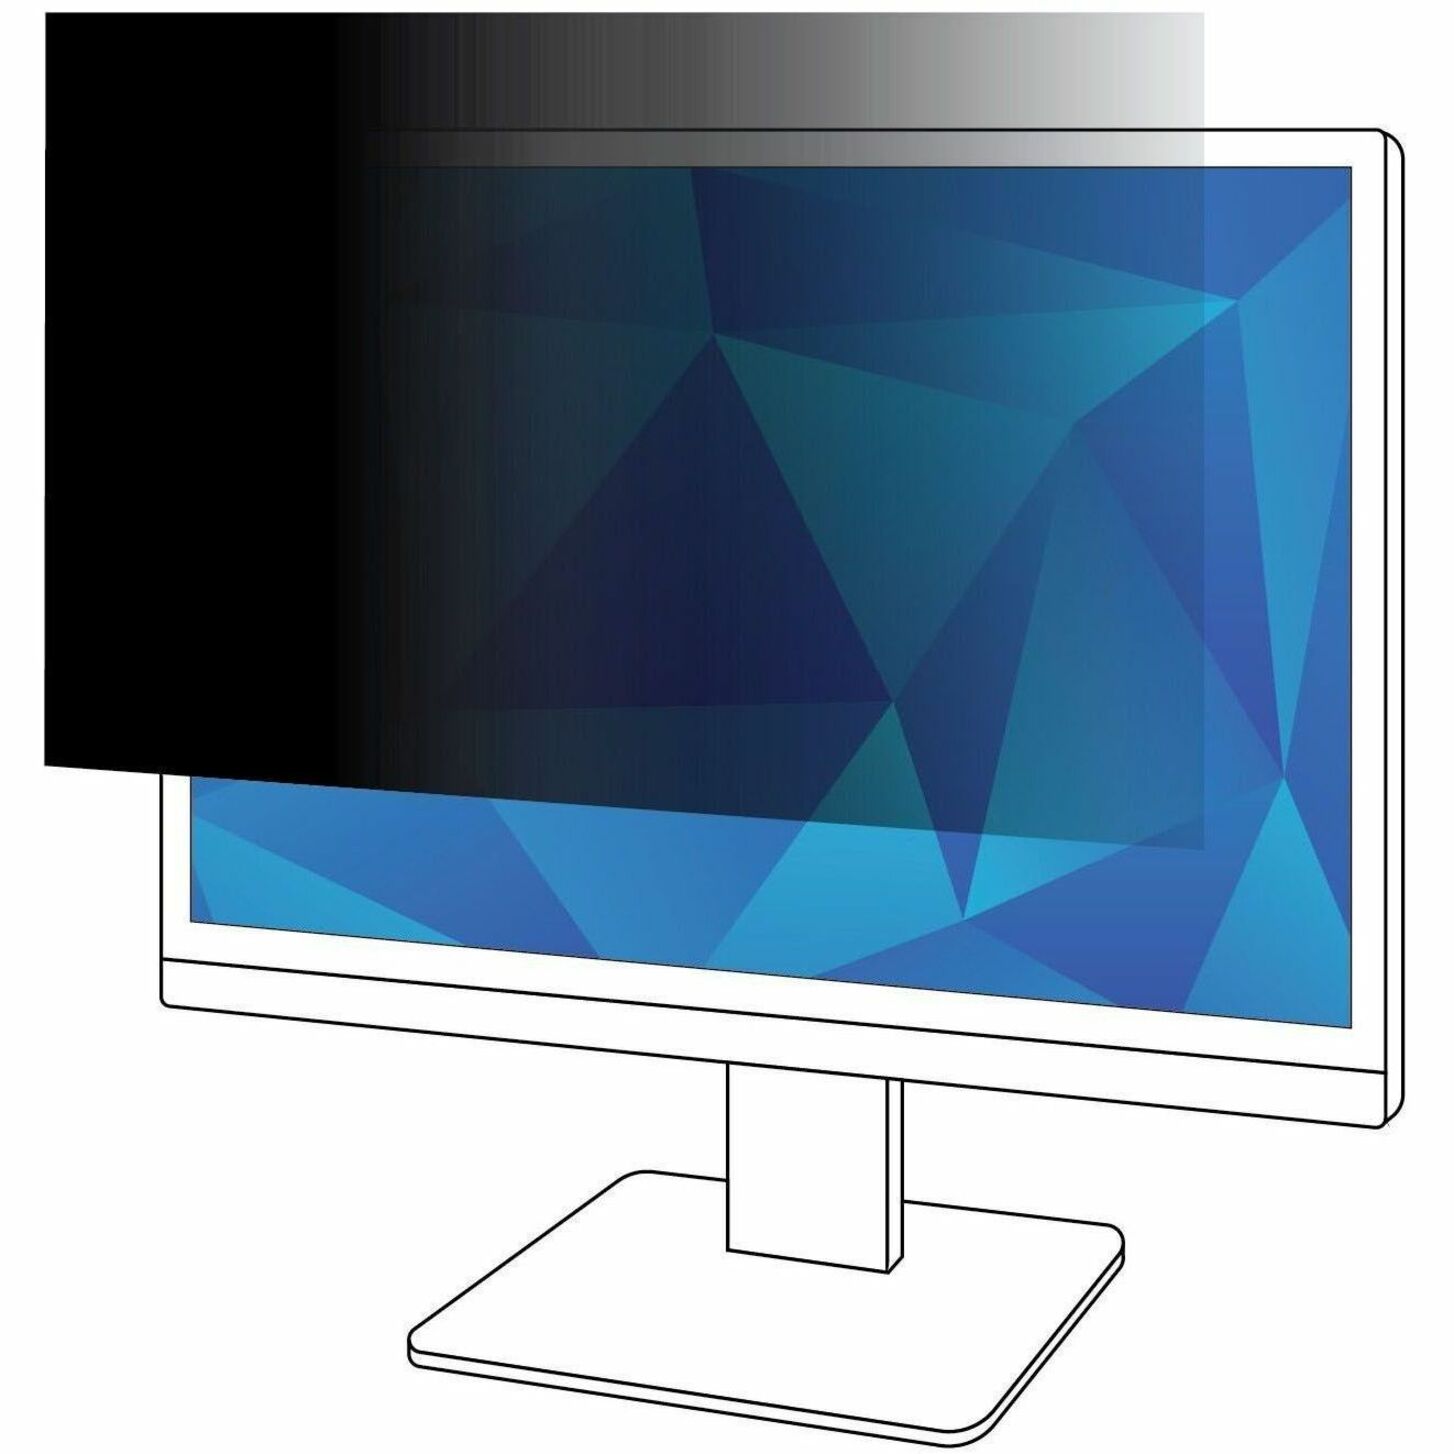 3M PF270W9B Privacy Filter for 27" Wide-screen Monitors, 16:9, Easy to Apply, Easy Clean, Limited Viewing Angle, Matte Black